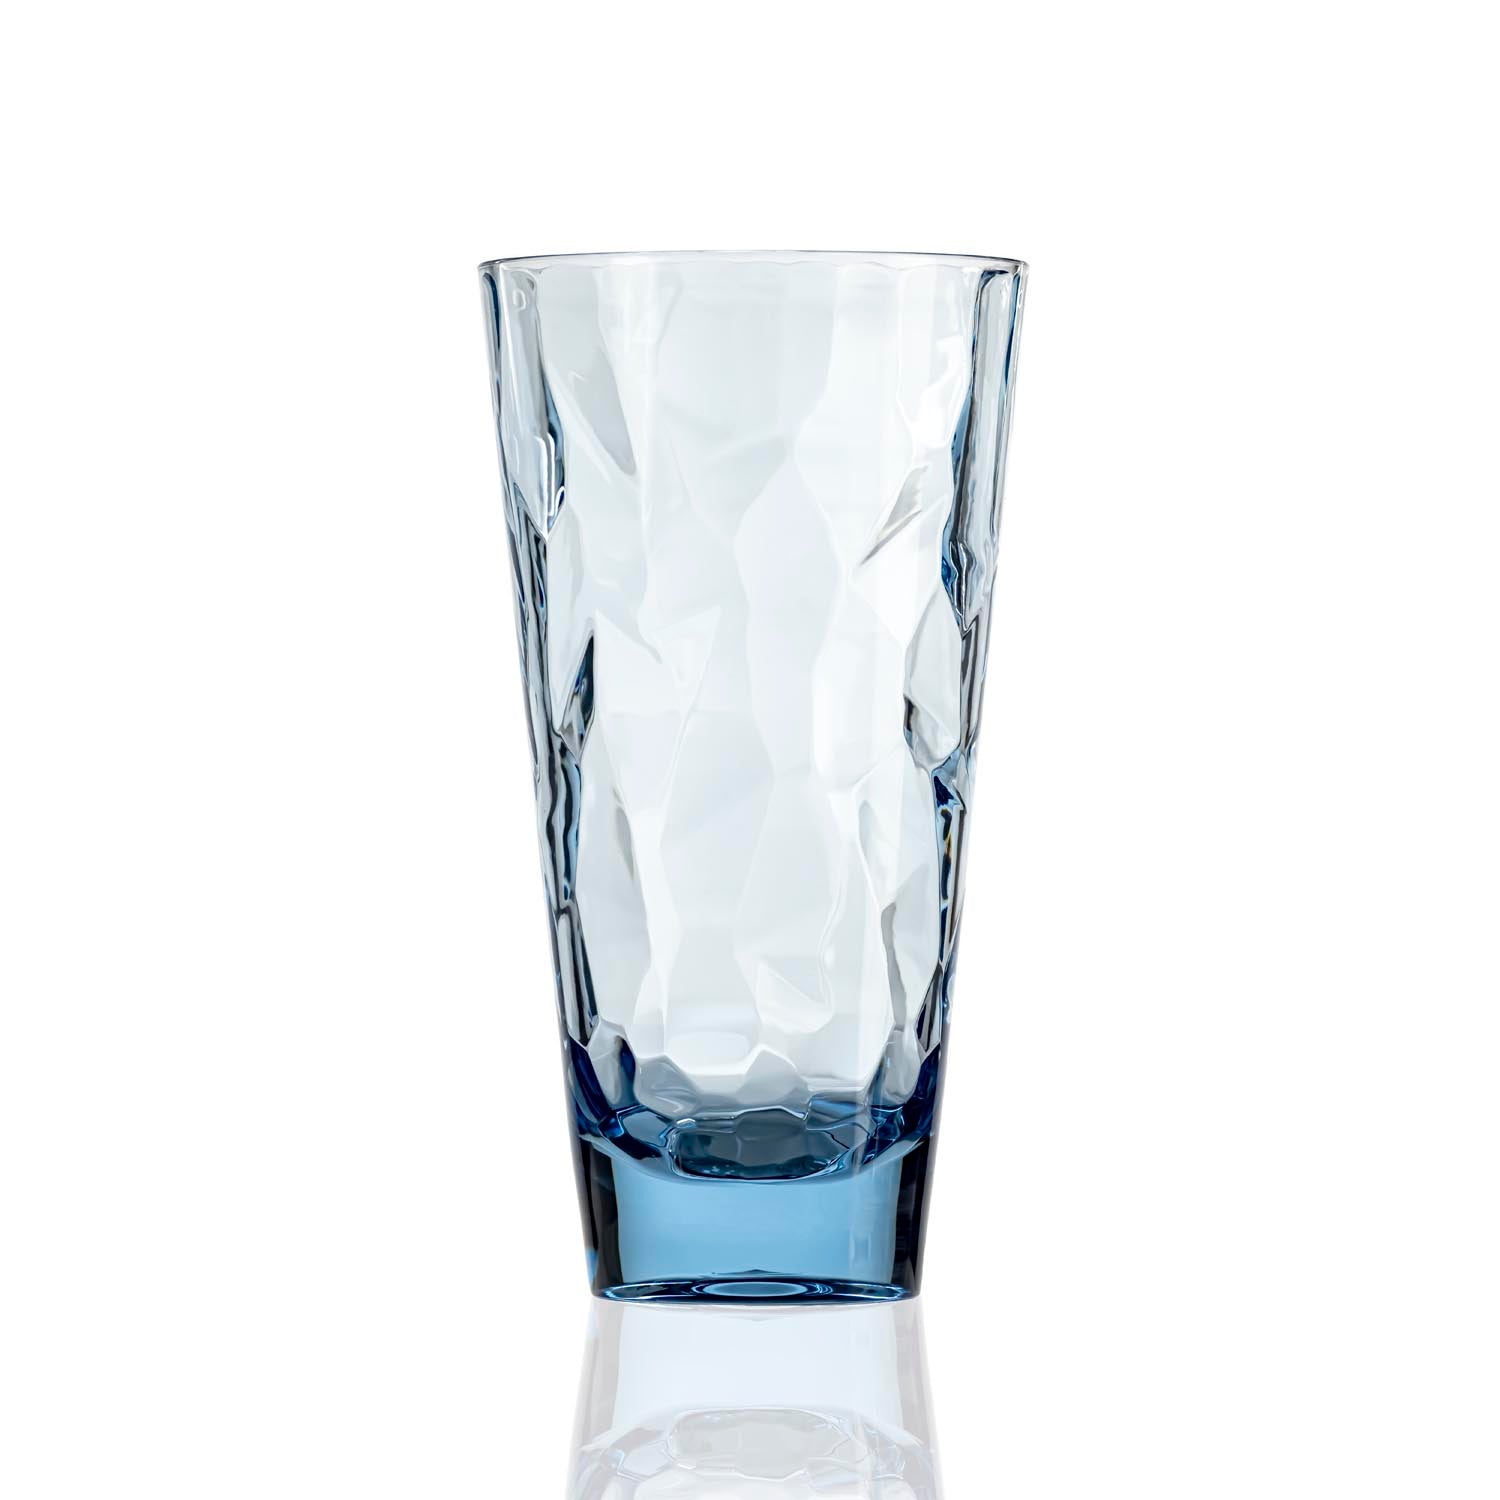 17-ounce blue acrylic tumbler glass from the Merritt Designs Cascade collection. Front view on white background